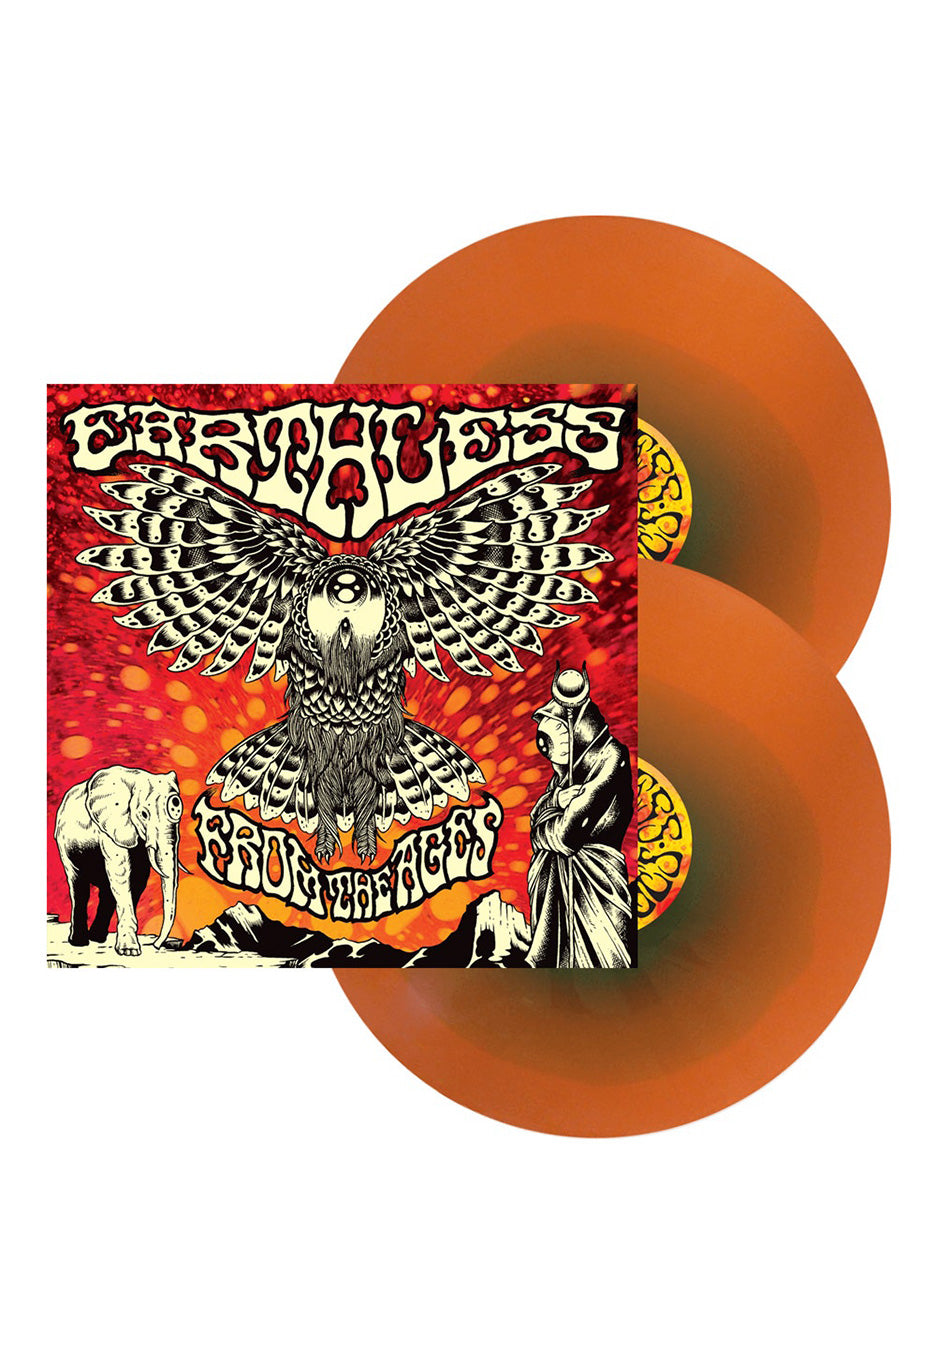 Earthless - From The Ages Blue Orange Crush Swirl - Colored 2 Vinyl